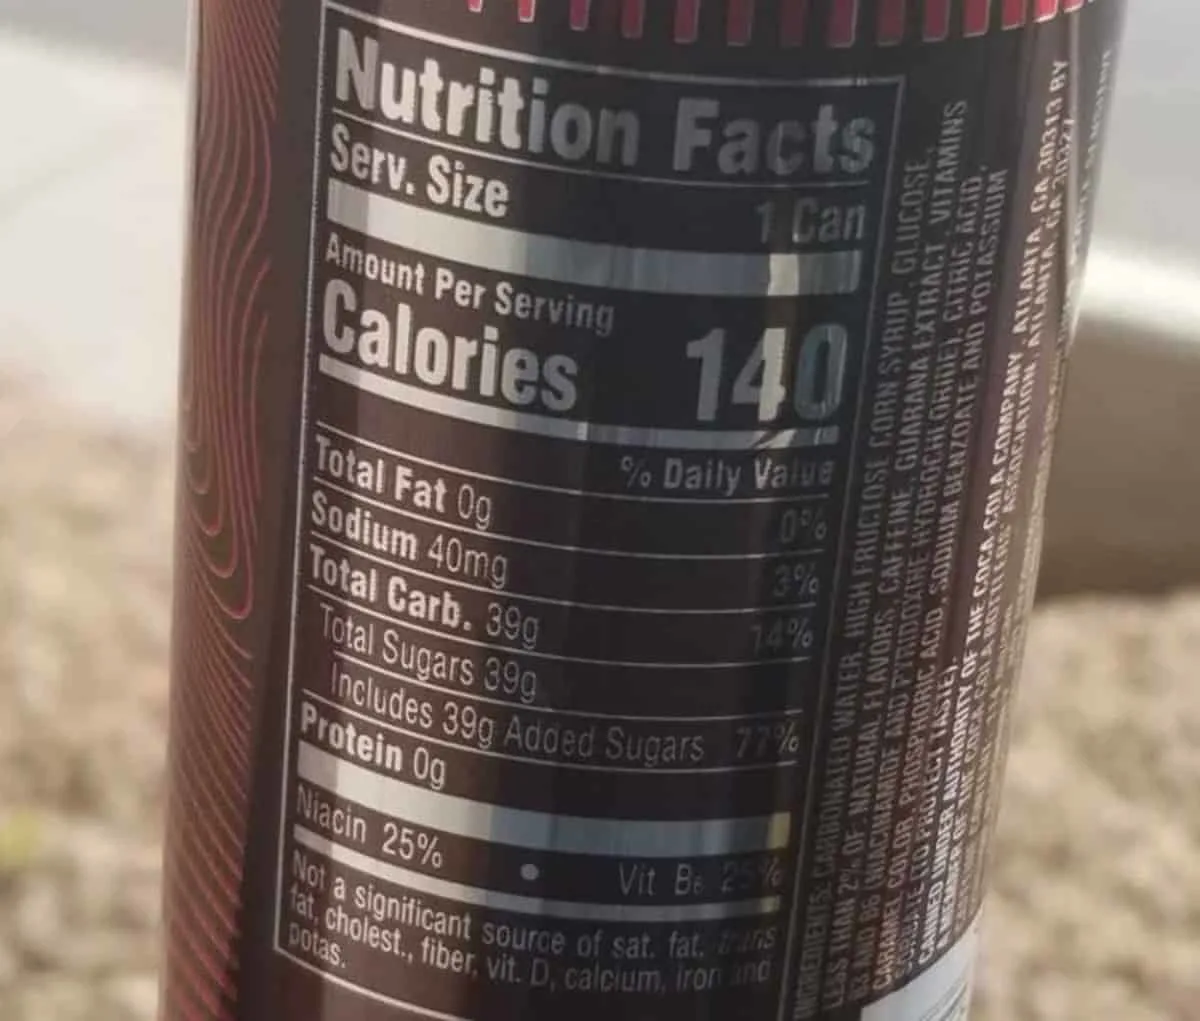 A can of Coca-Cola Energy Drink